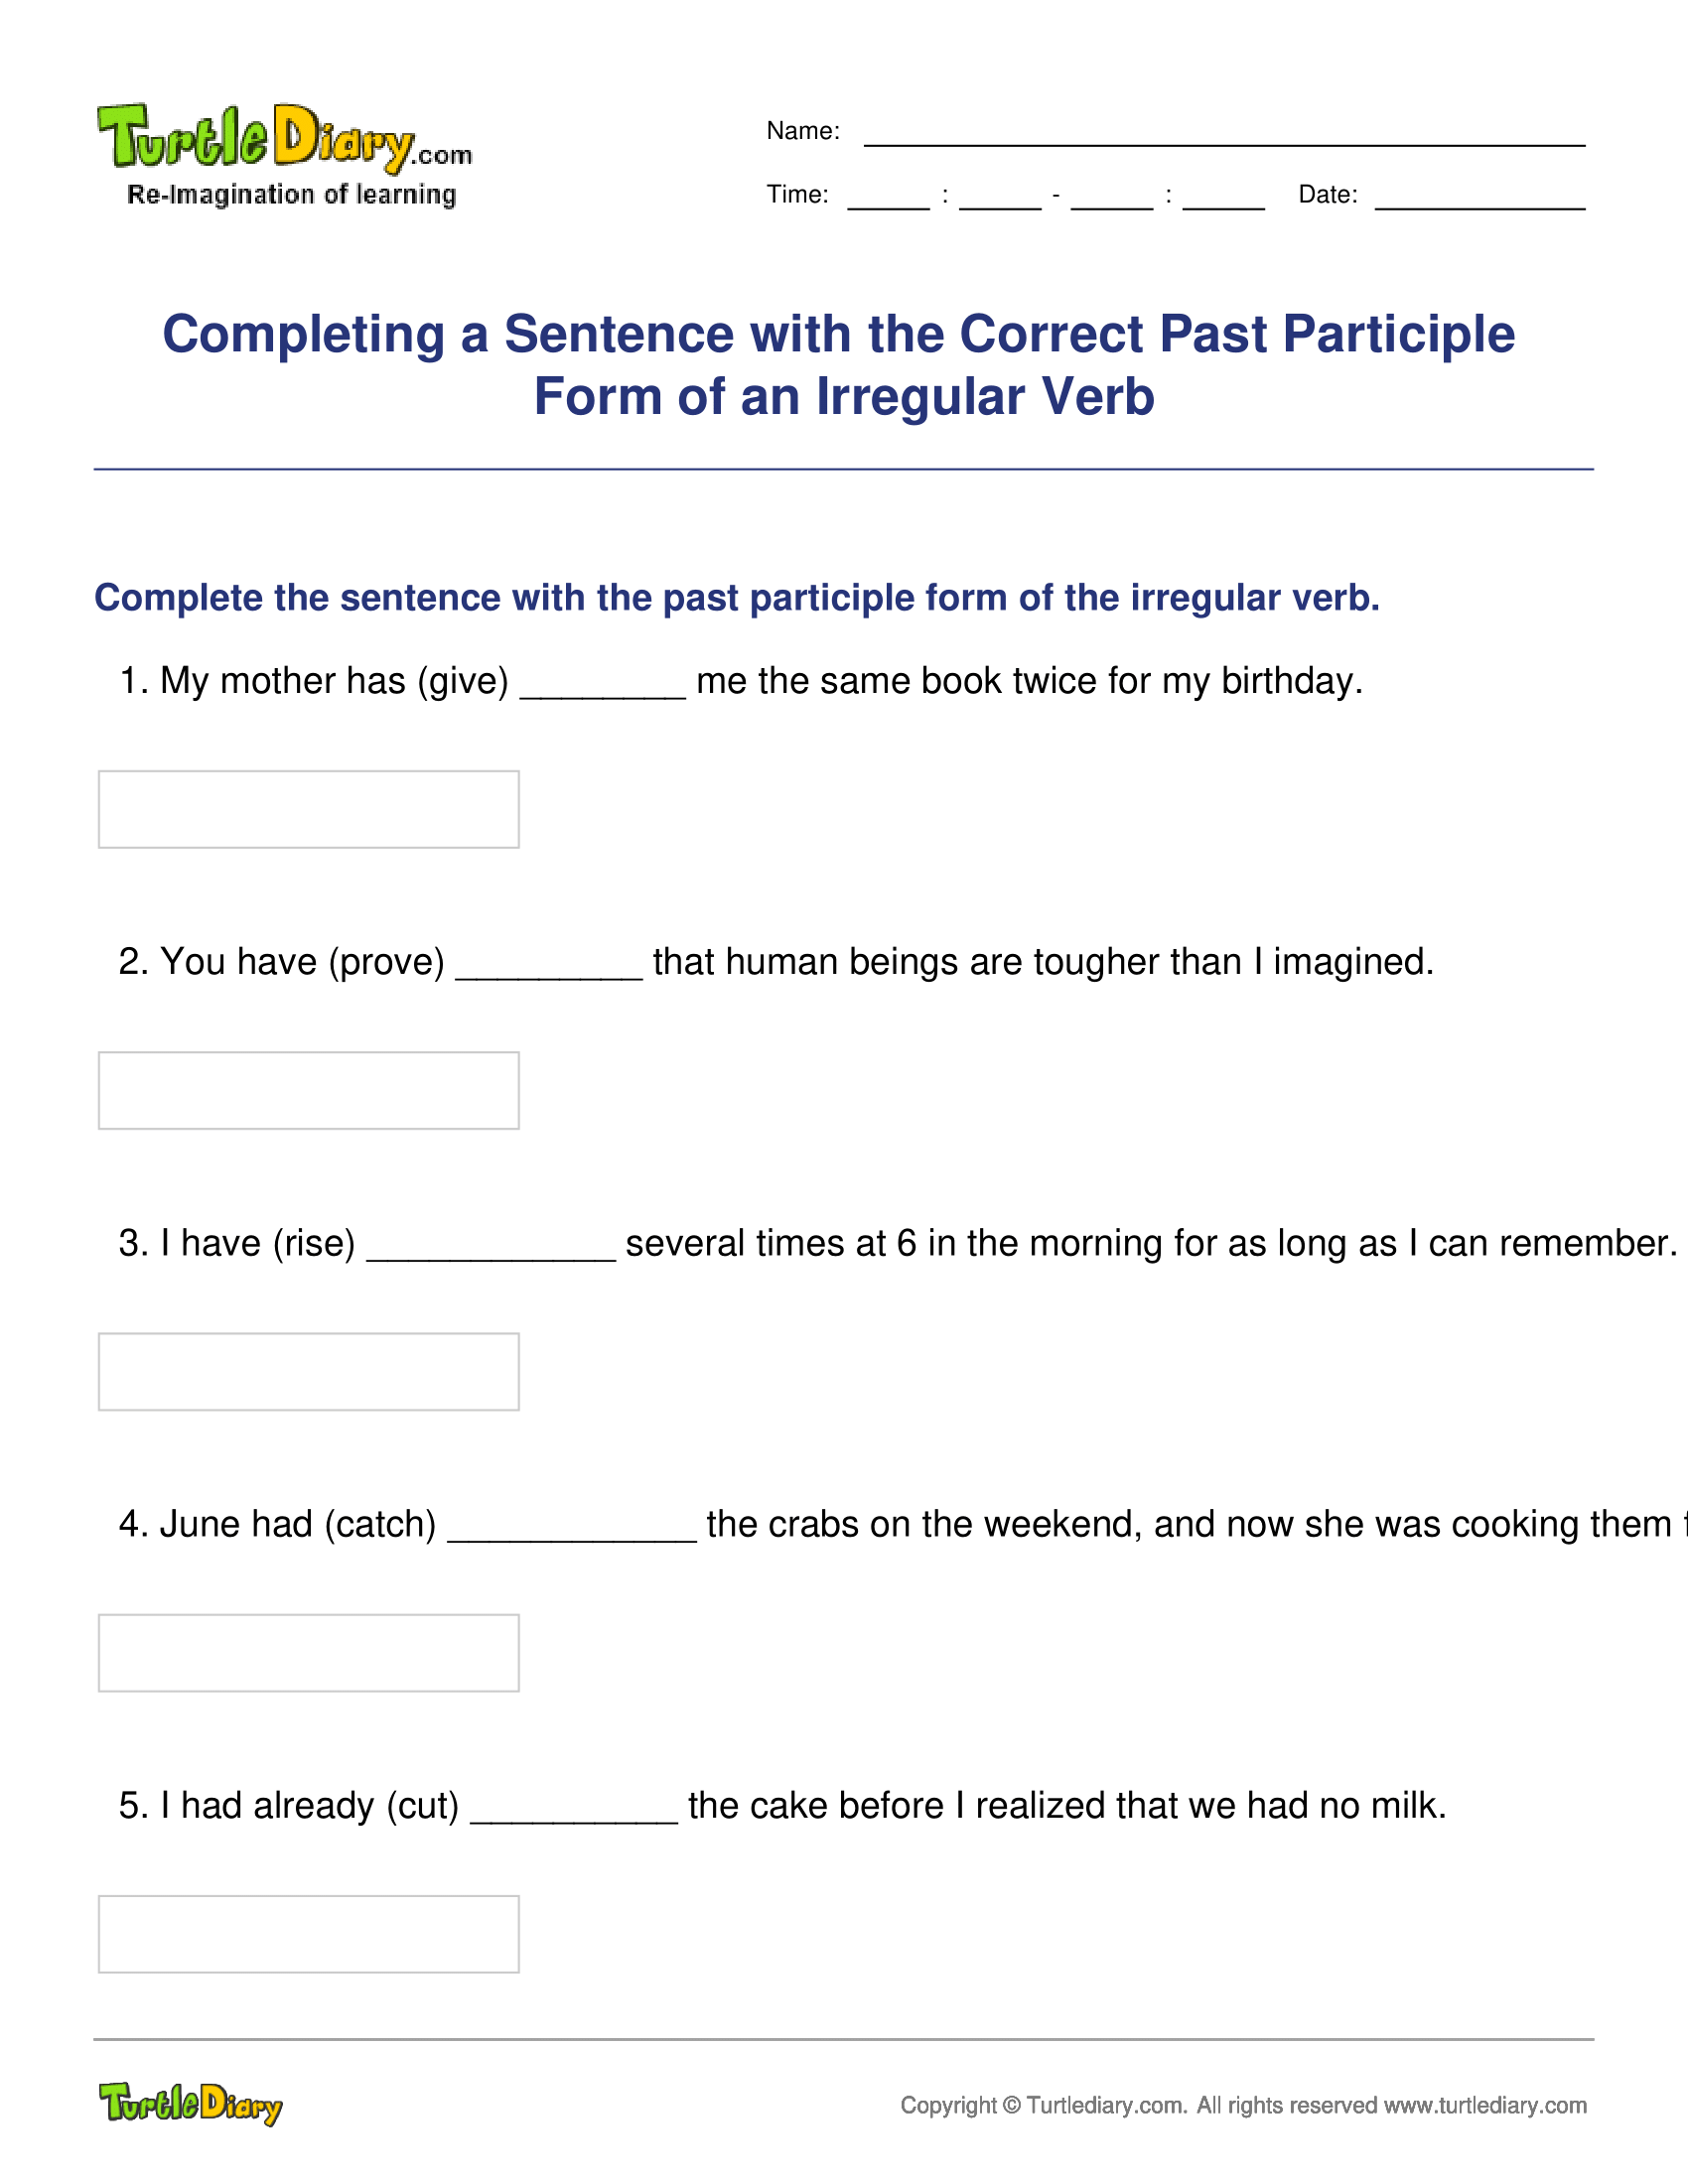 Completing a Sentence with the Correct Past Participle Form of an Irregular Verb